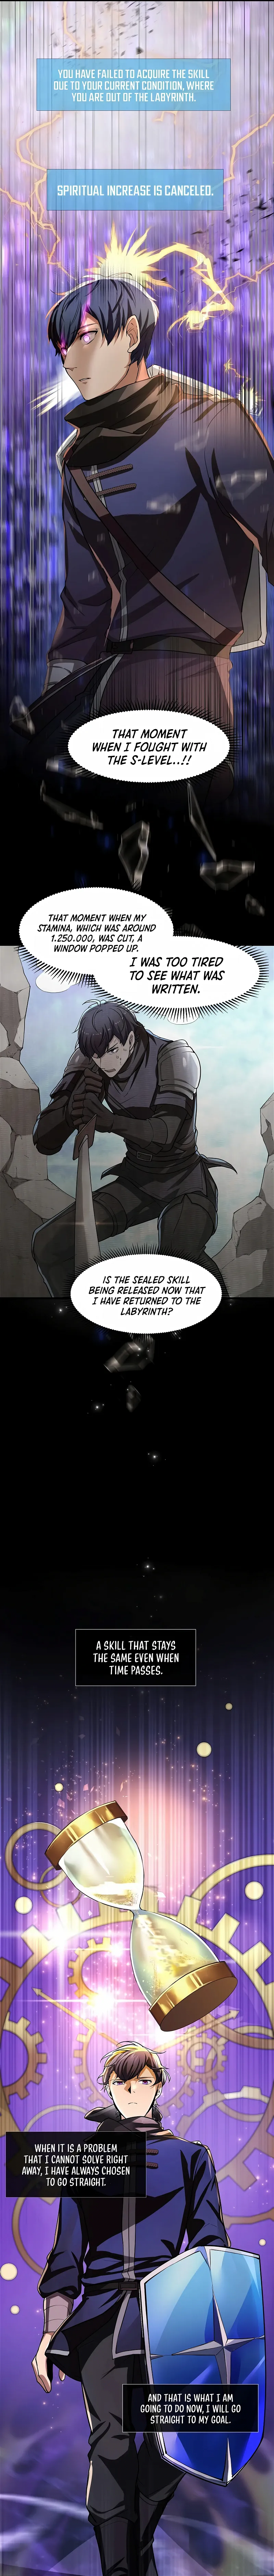 Leveling Up With Skills Chapter 7 page 14